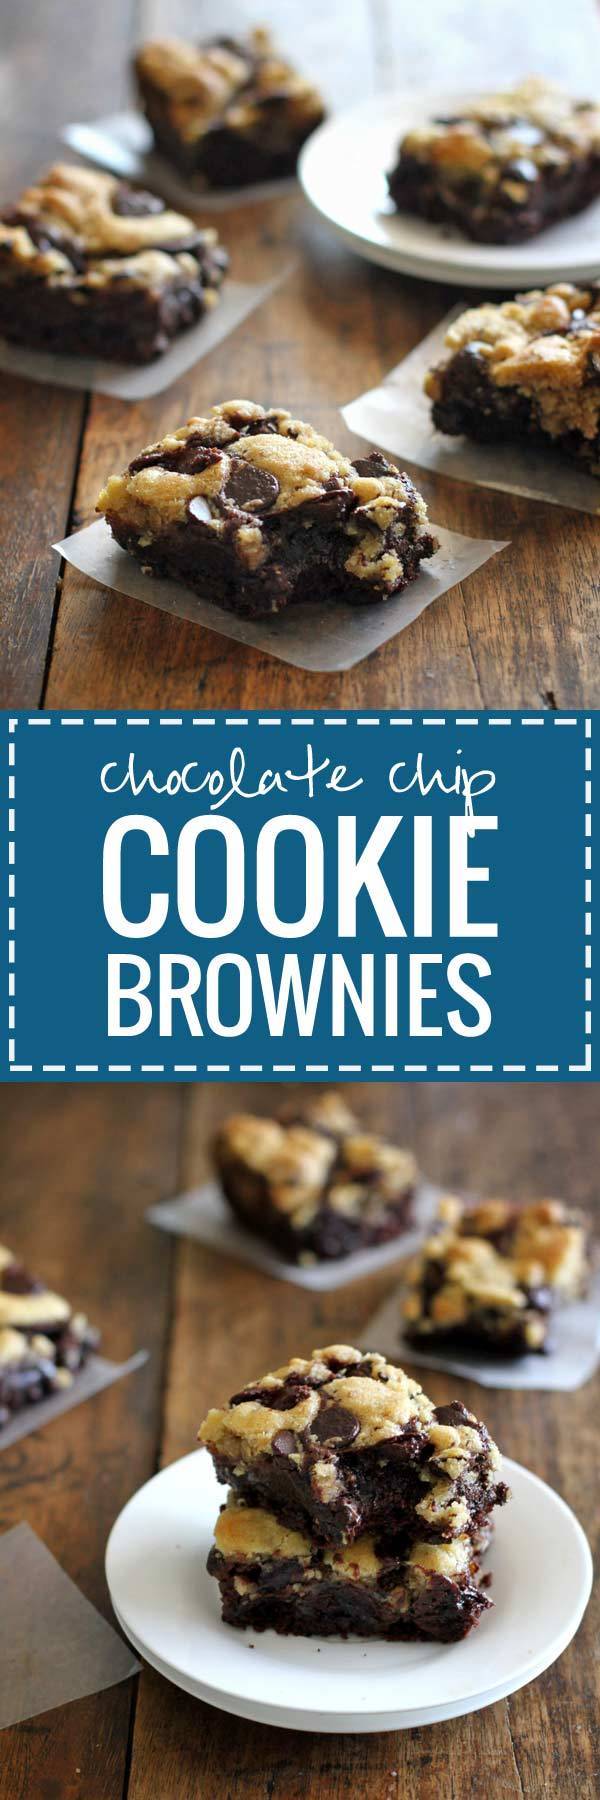 Chocolate Chip Cookie Brownies - These easy chocolate chip cookie brownies have my very favorite chocolate chip cookie dough baked into the top layer of decadent, fudgy brownies | pinchofyum.com